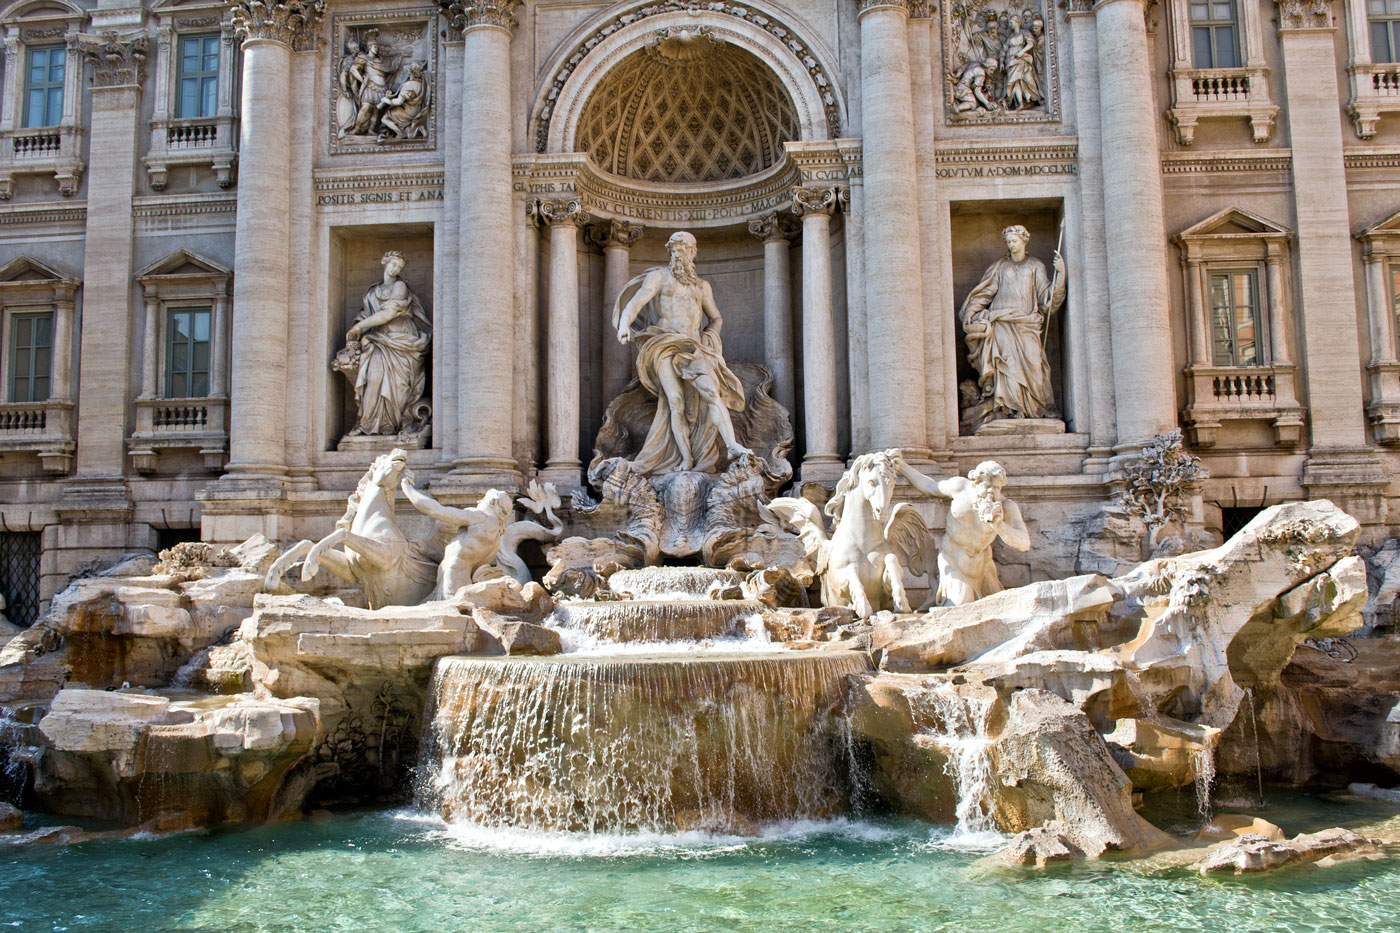 the Trevi Fountain front view